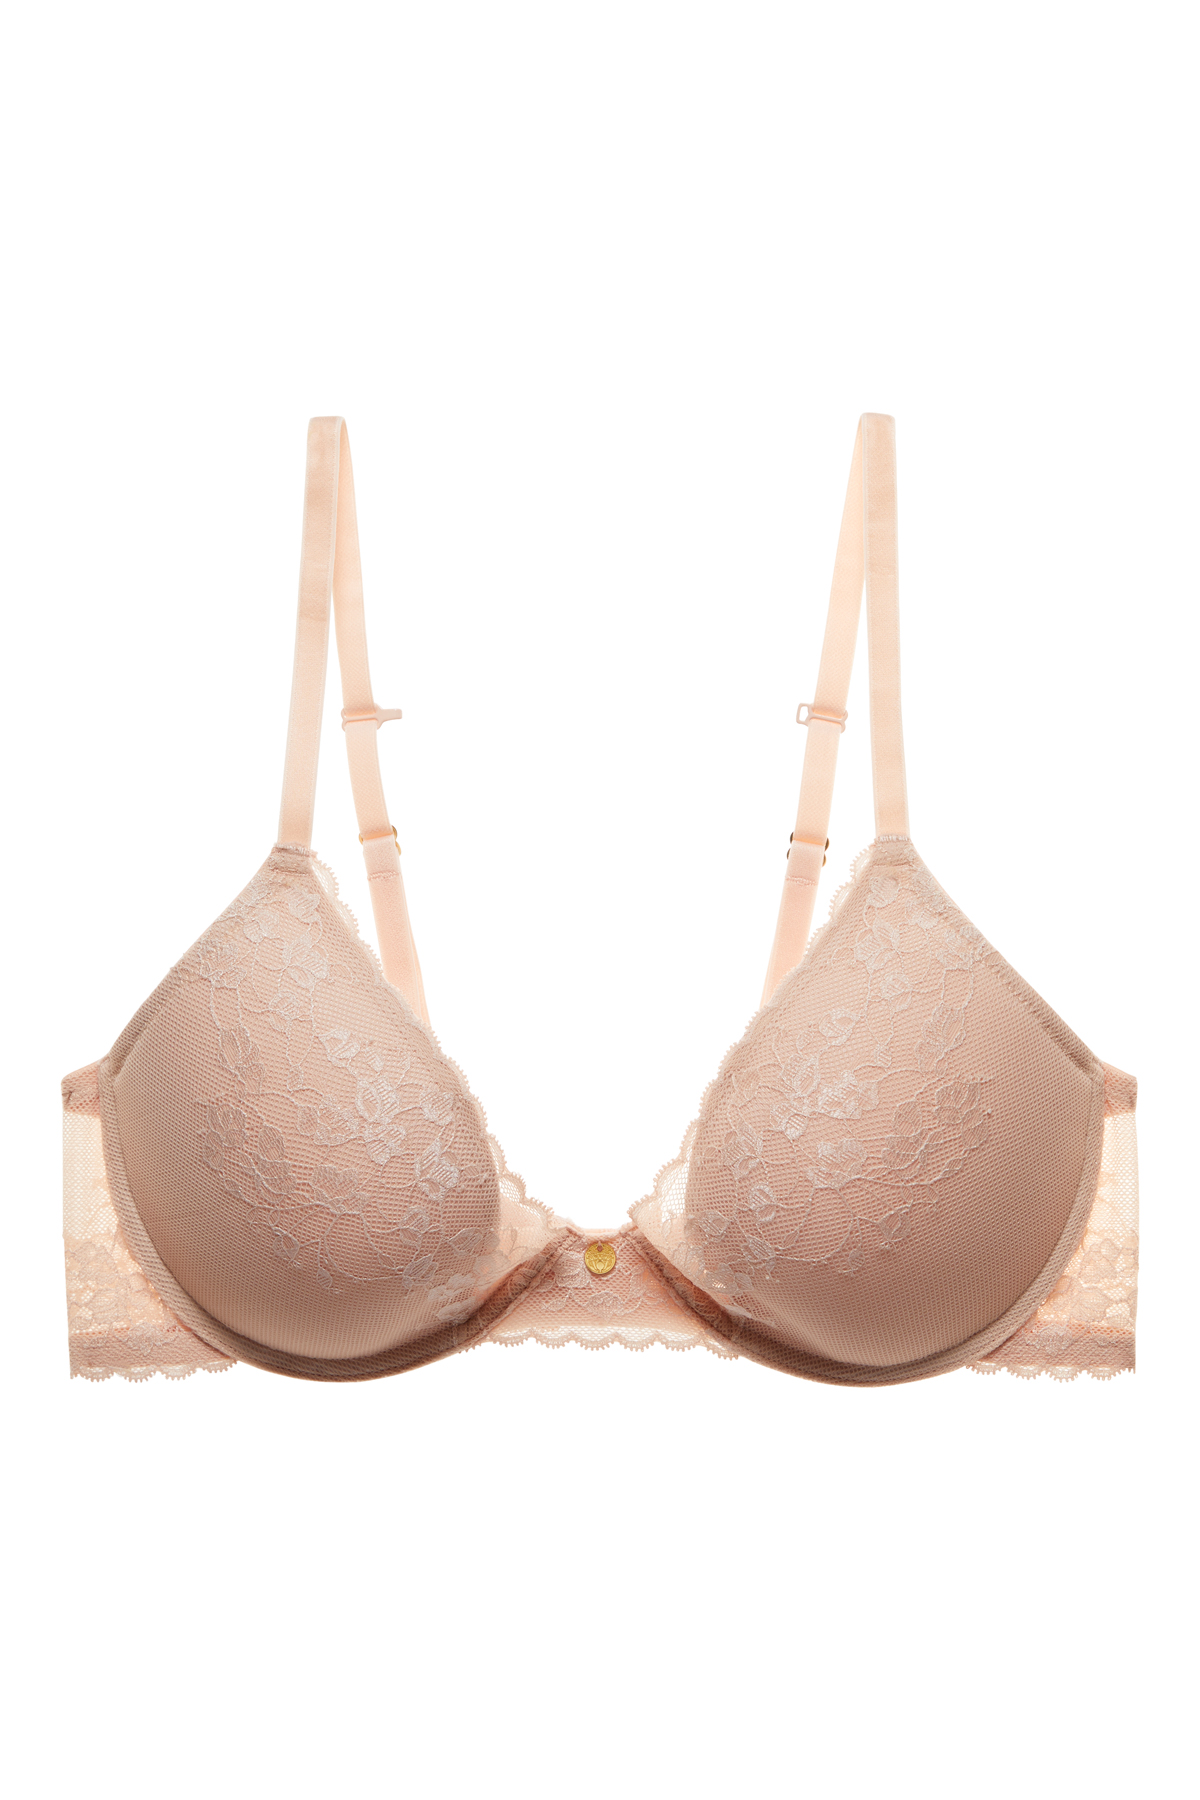 Buy Cherry Blossom Convertible Spacer Push-Up Bra Online